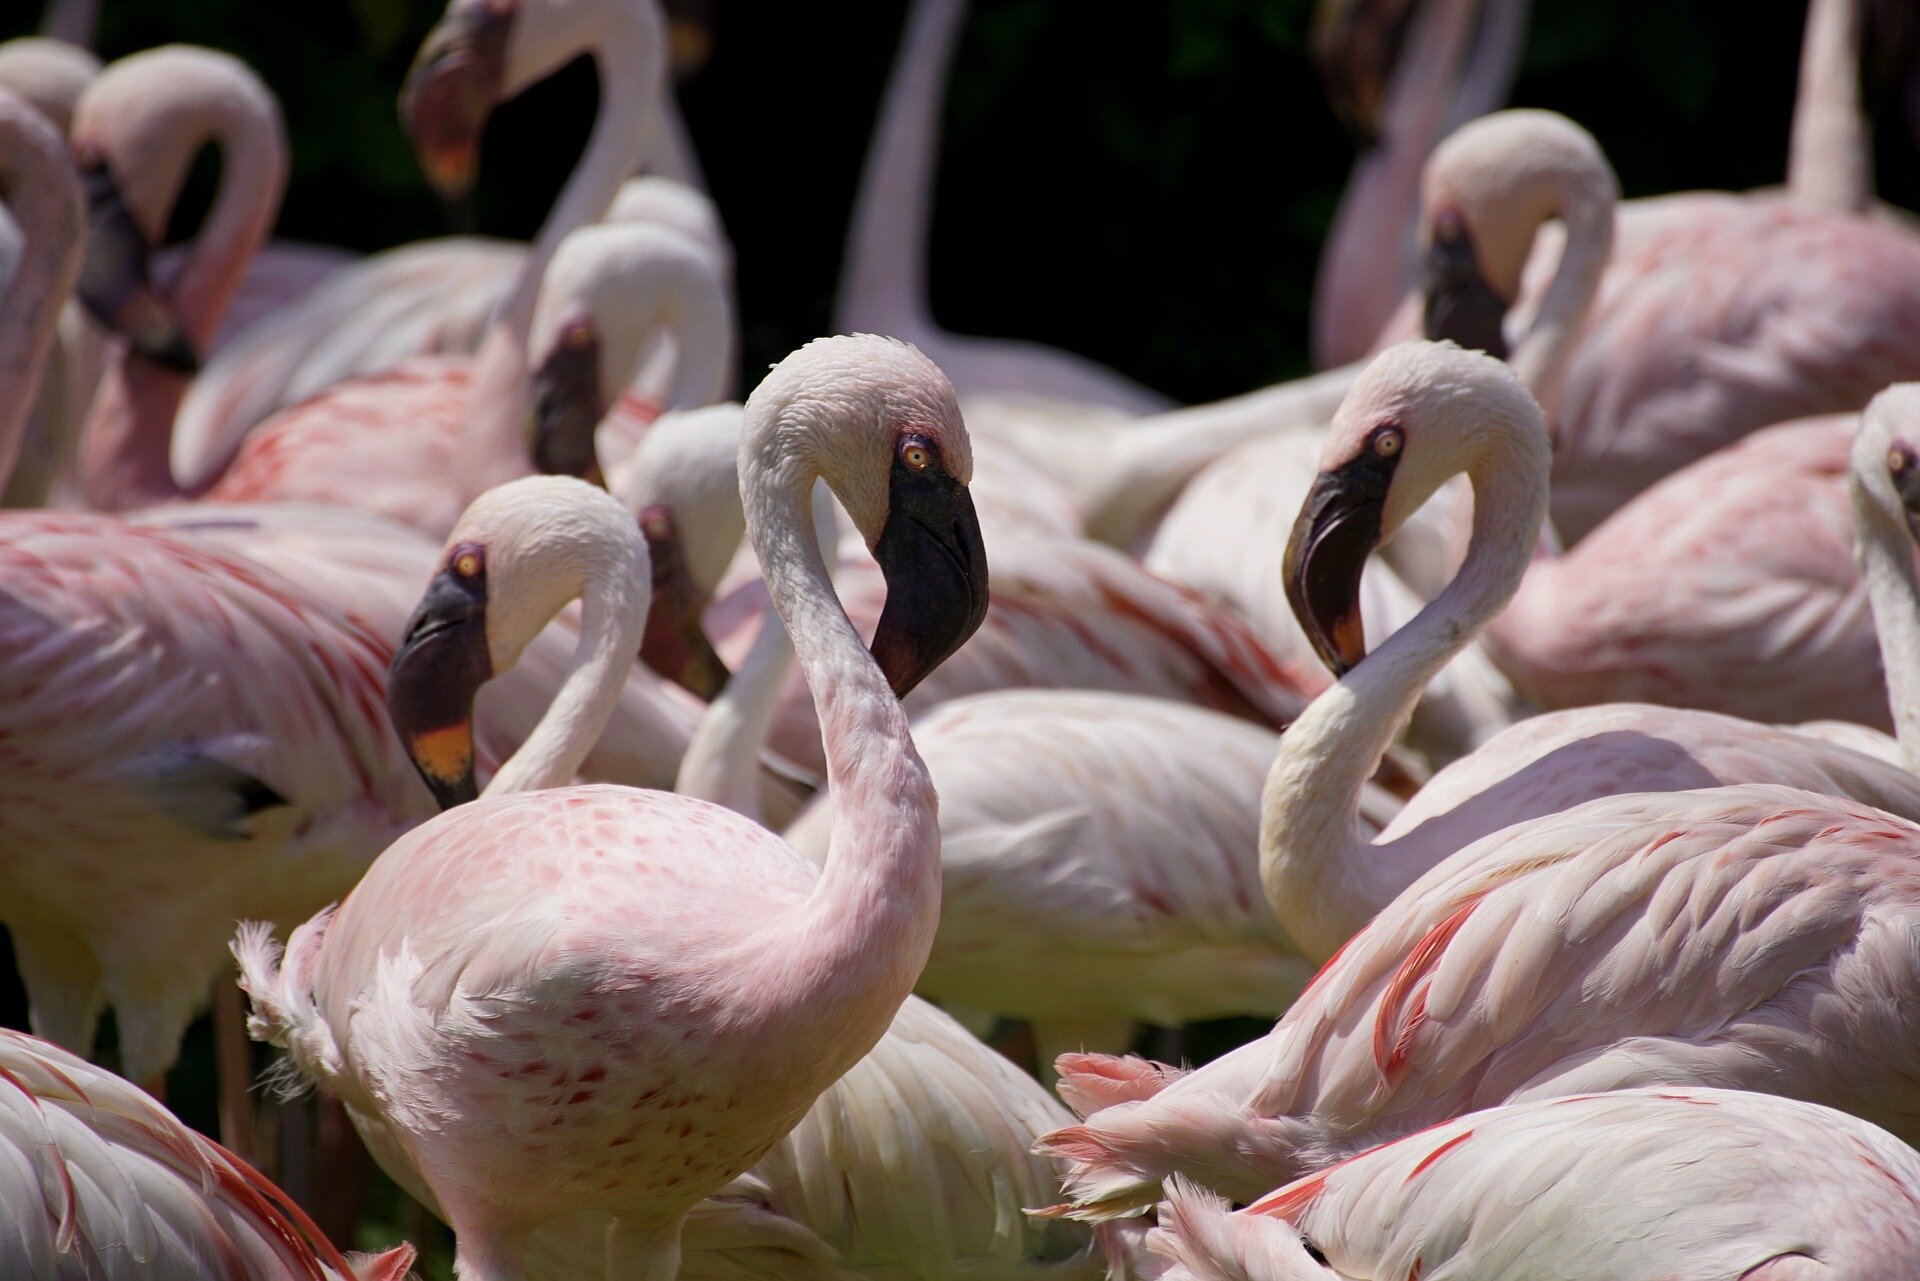 Africa’s iconic flamingos threatened by rising lake levels, study shows